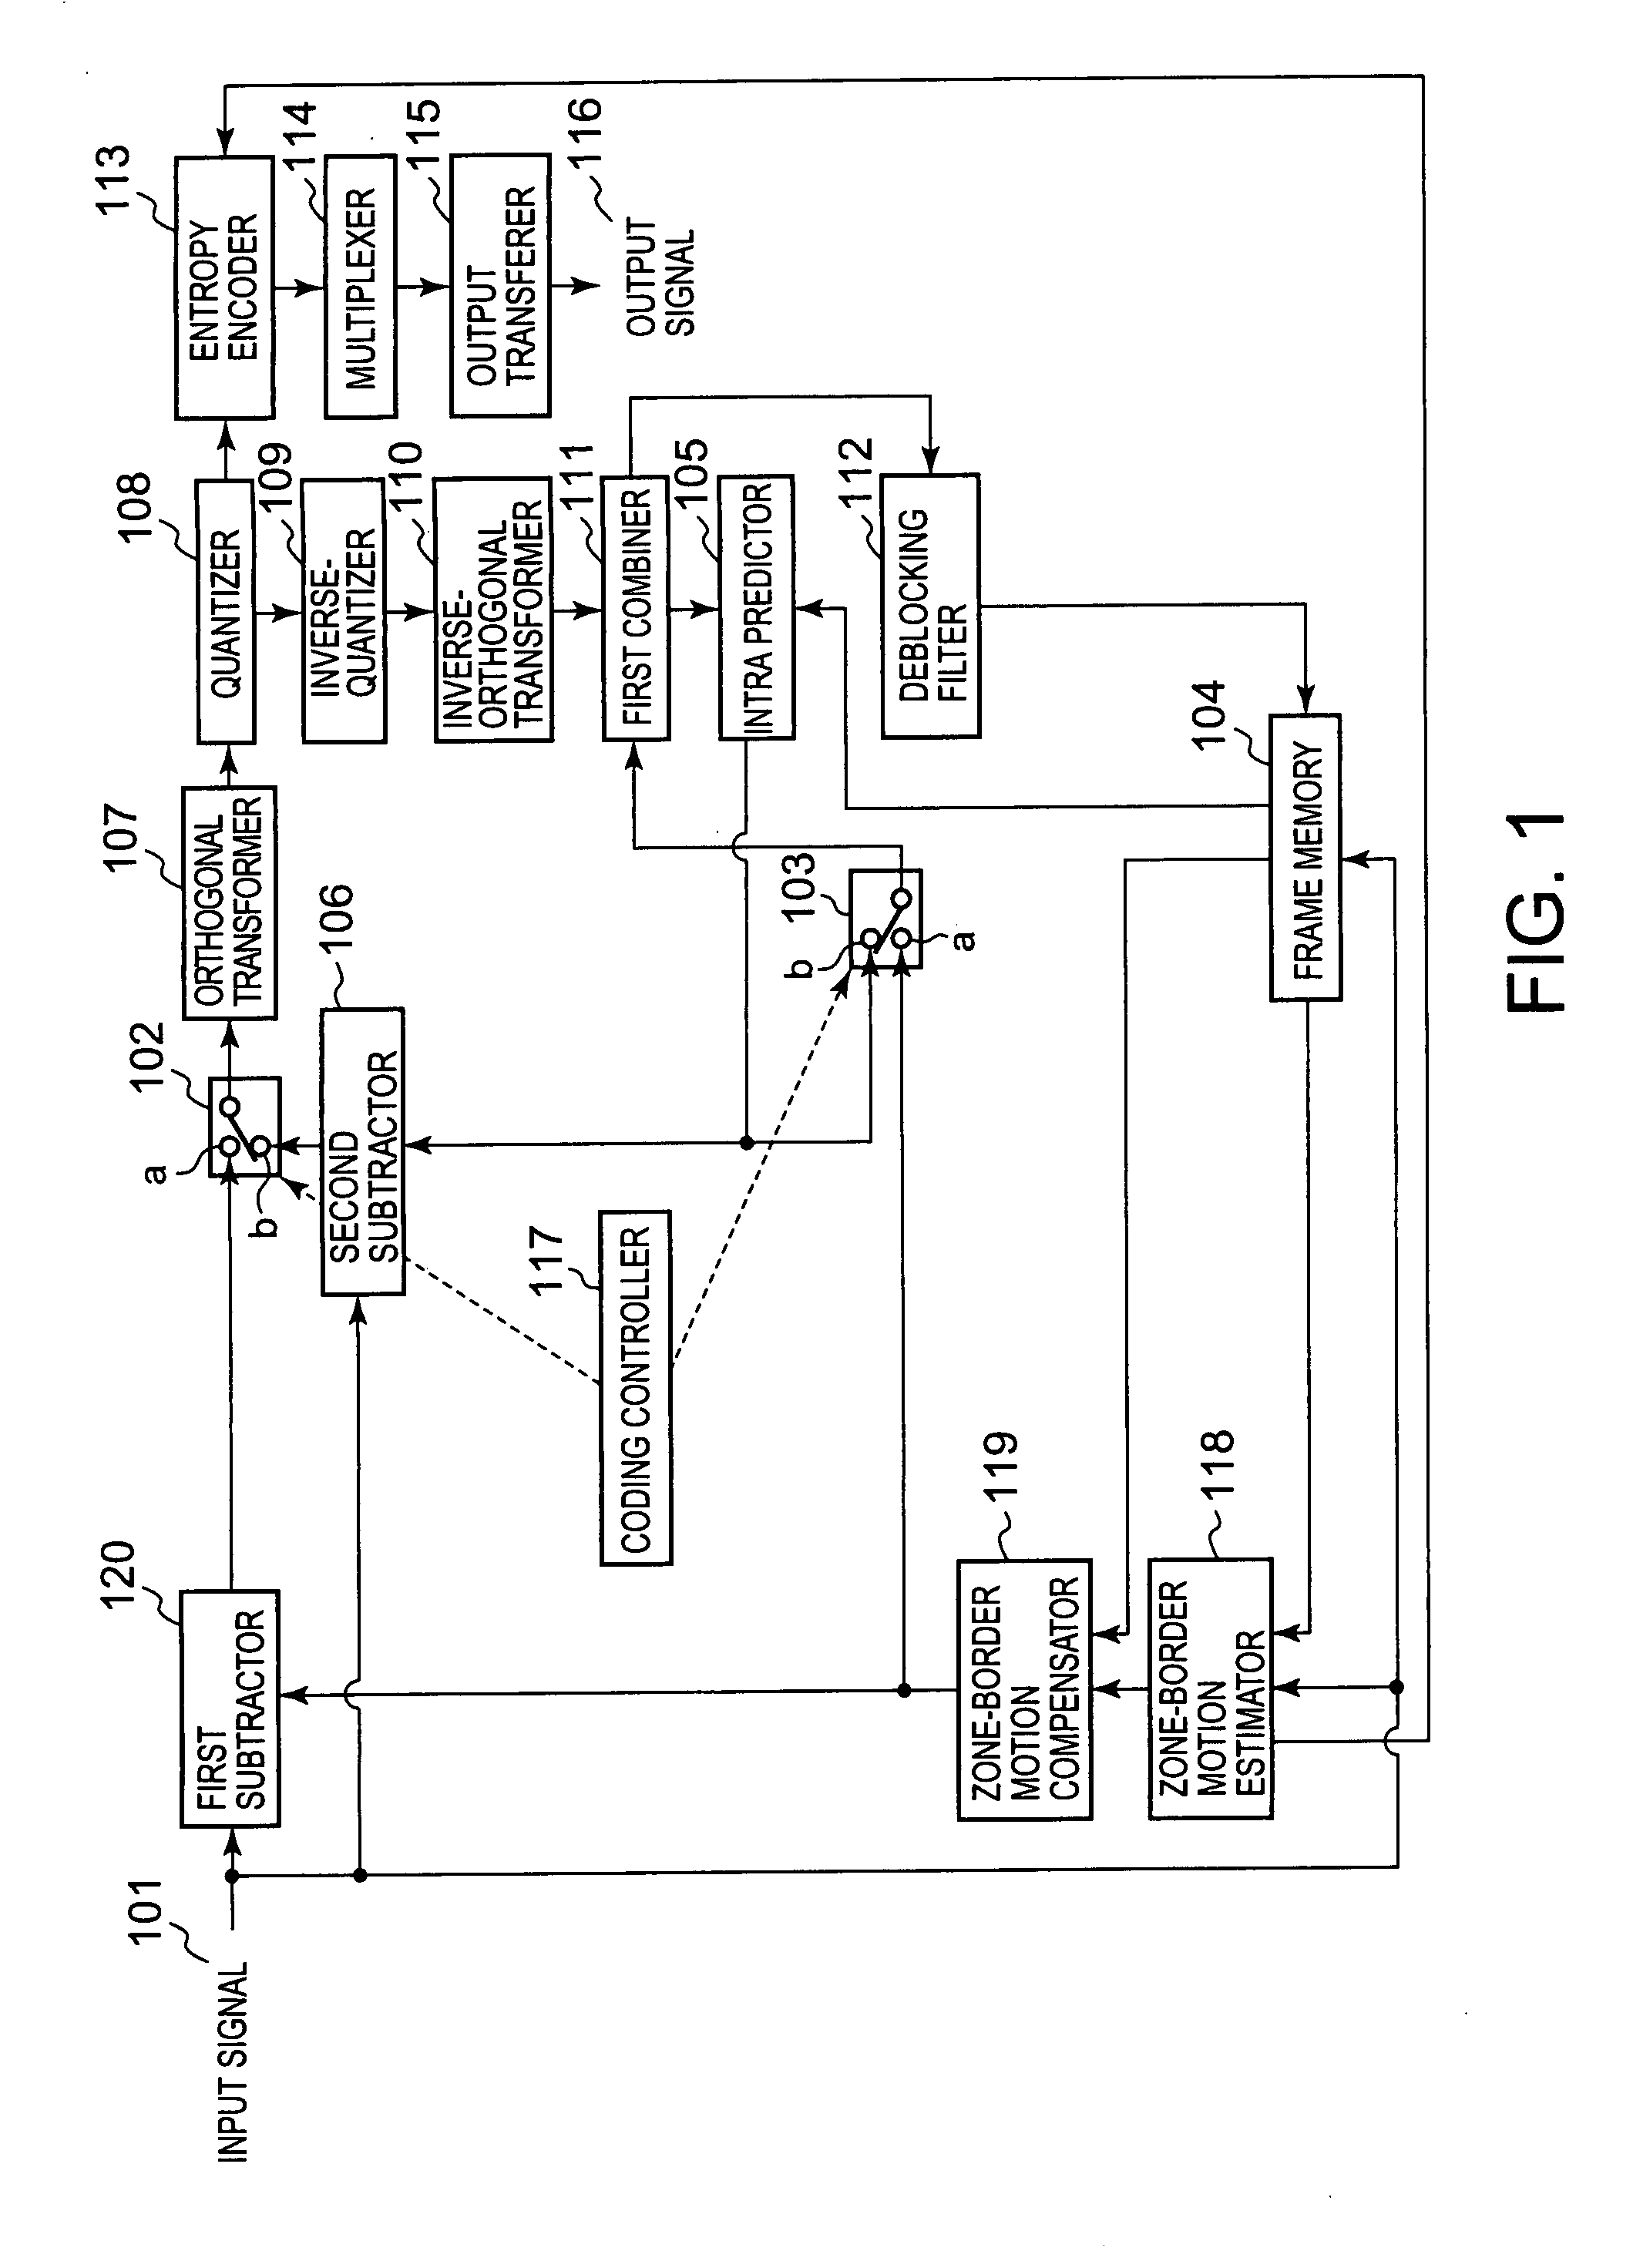 Moving-picture coding apparatus, method and program, and moving-picture decoding apparatus, method and program